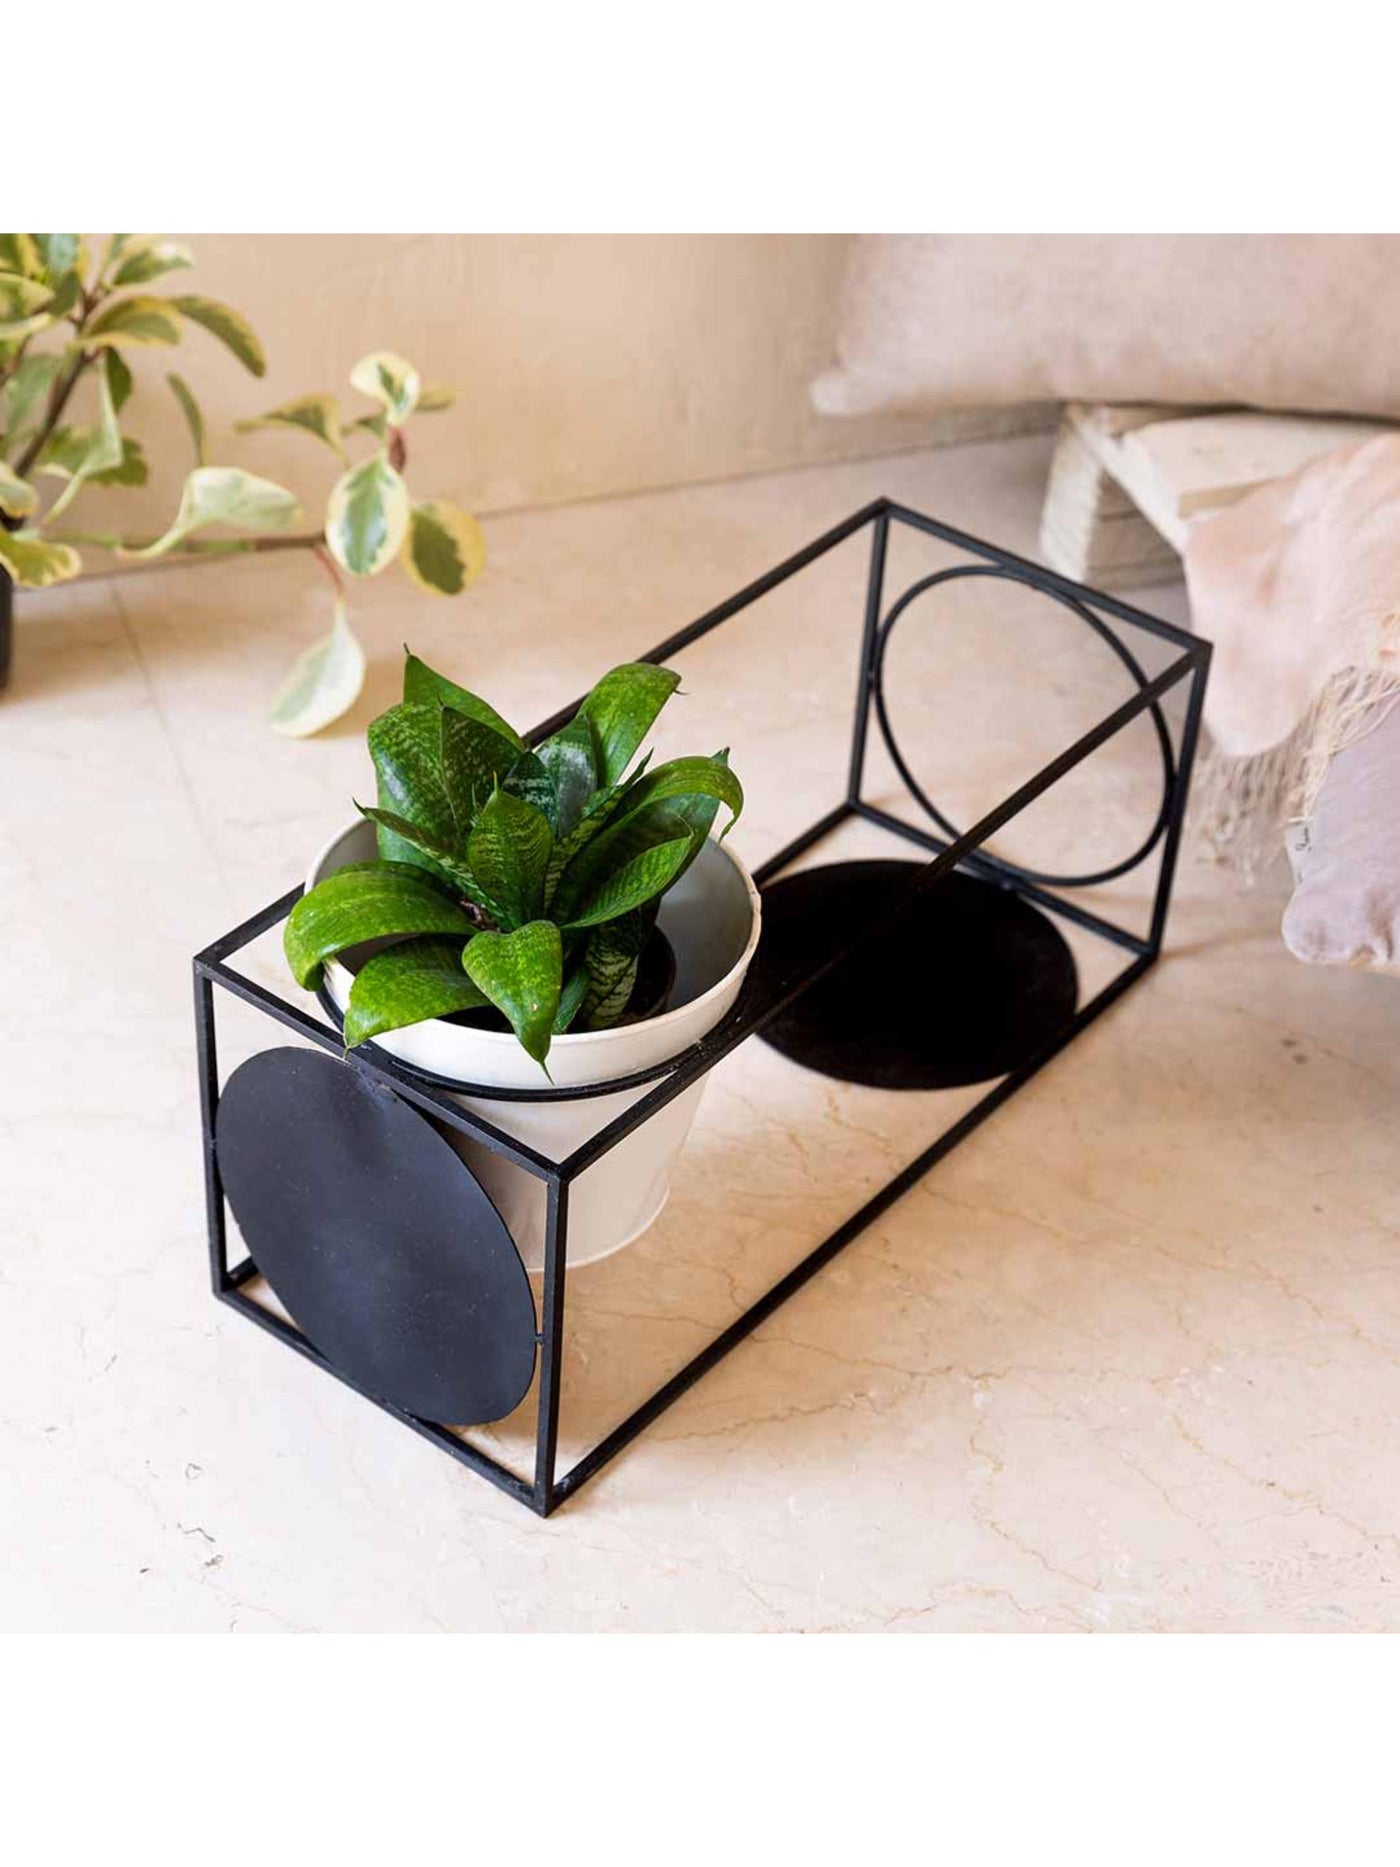 Four in One Planter - Metal Stand